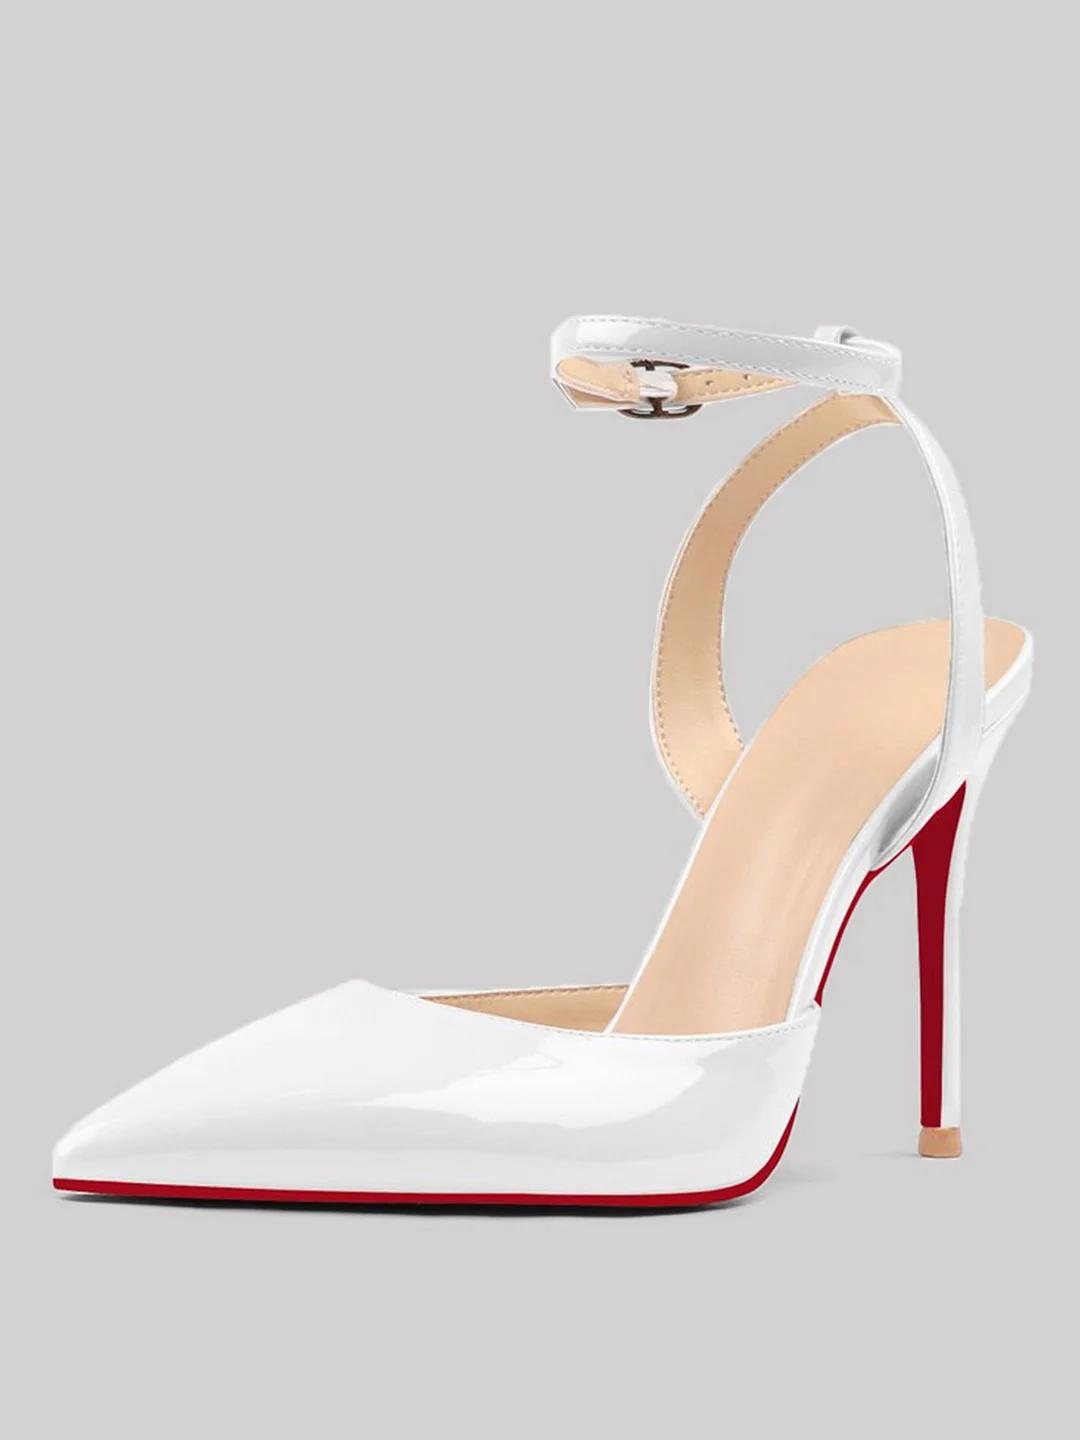 100mm Women's Slingback Ankle Buckle Pointed Toe Red Bottom Wedding High Heels